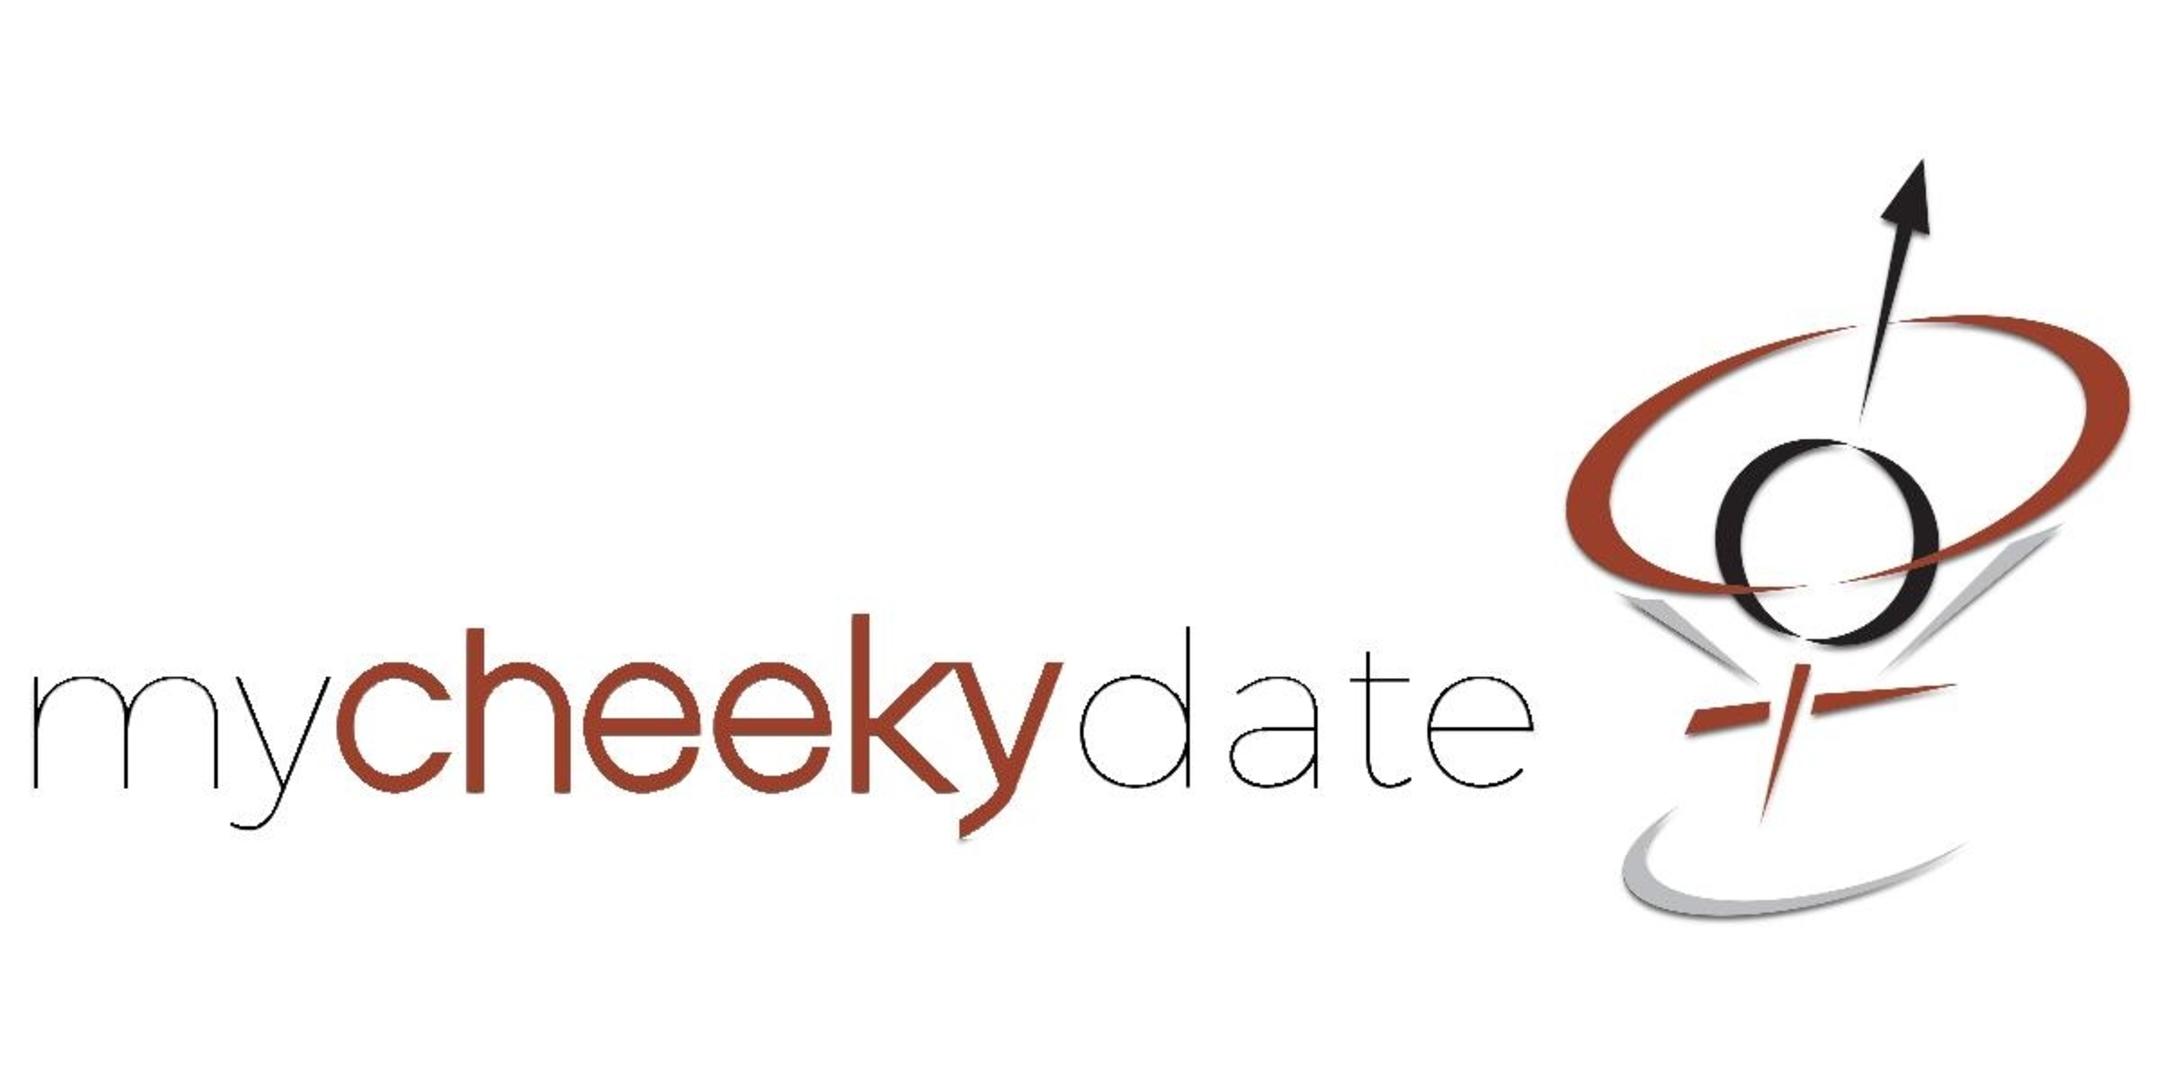 Singles event | Saturday Speed Dating in LA (Ages 24-38) | MyCheekyDate